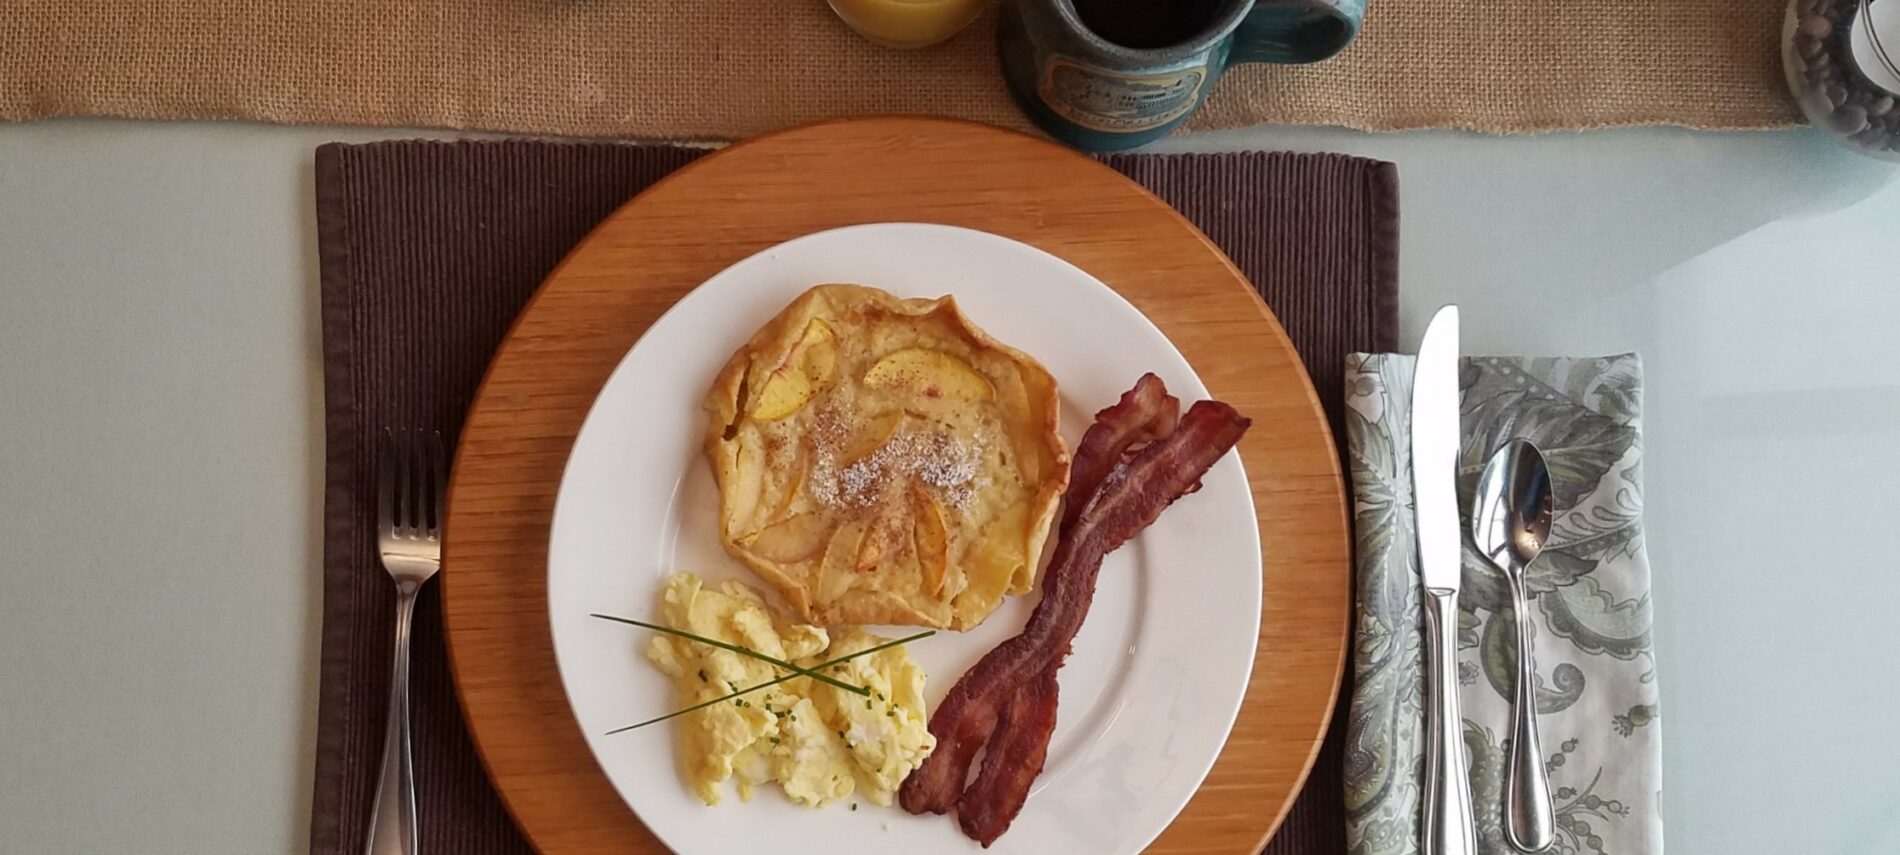 Overhead view of a table with breakfast plate containing peach dutch baby pancake, scrambled eggs and bacon along with coffee in a pottery mug and orange juice